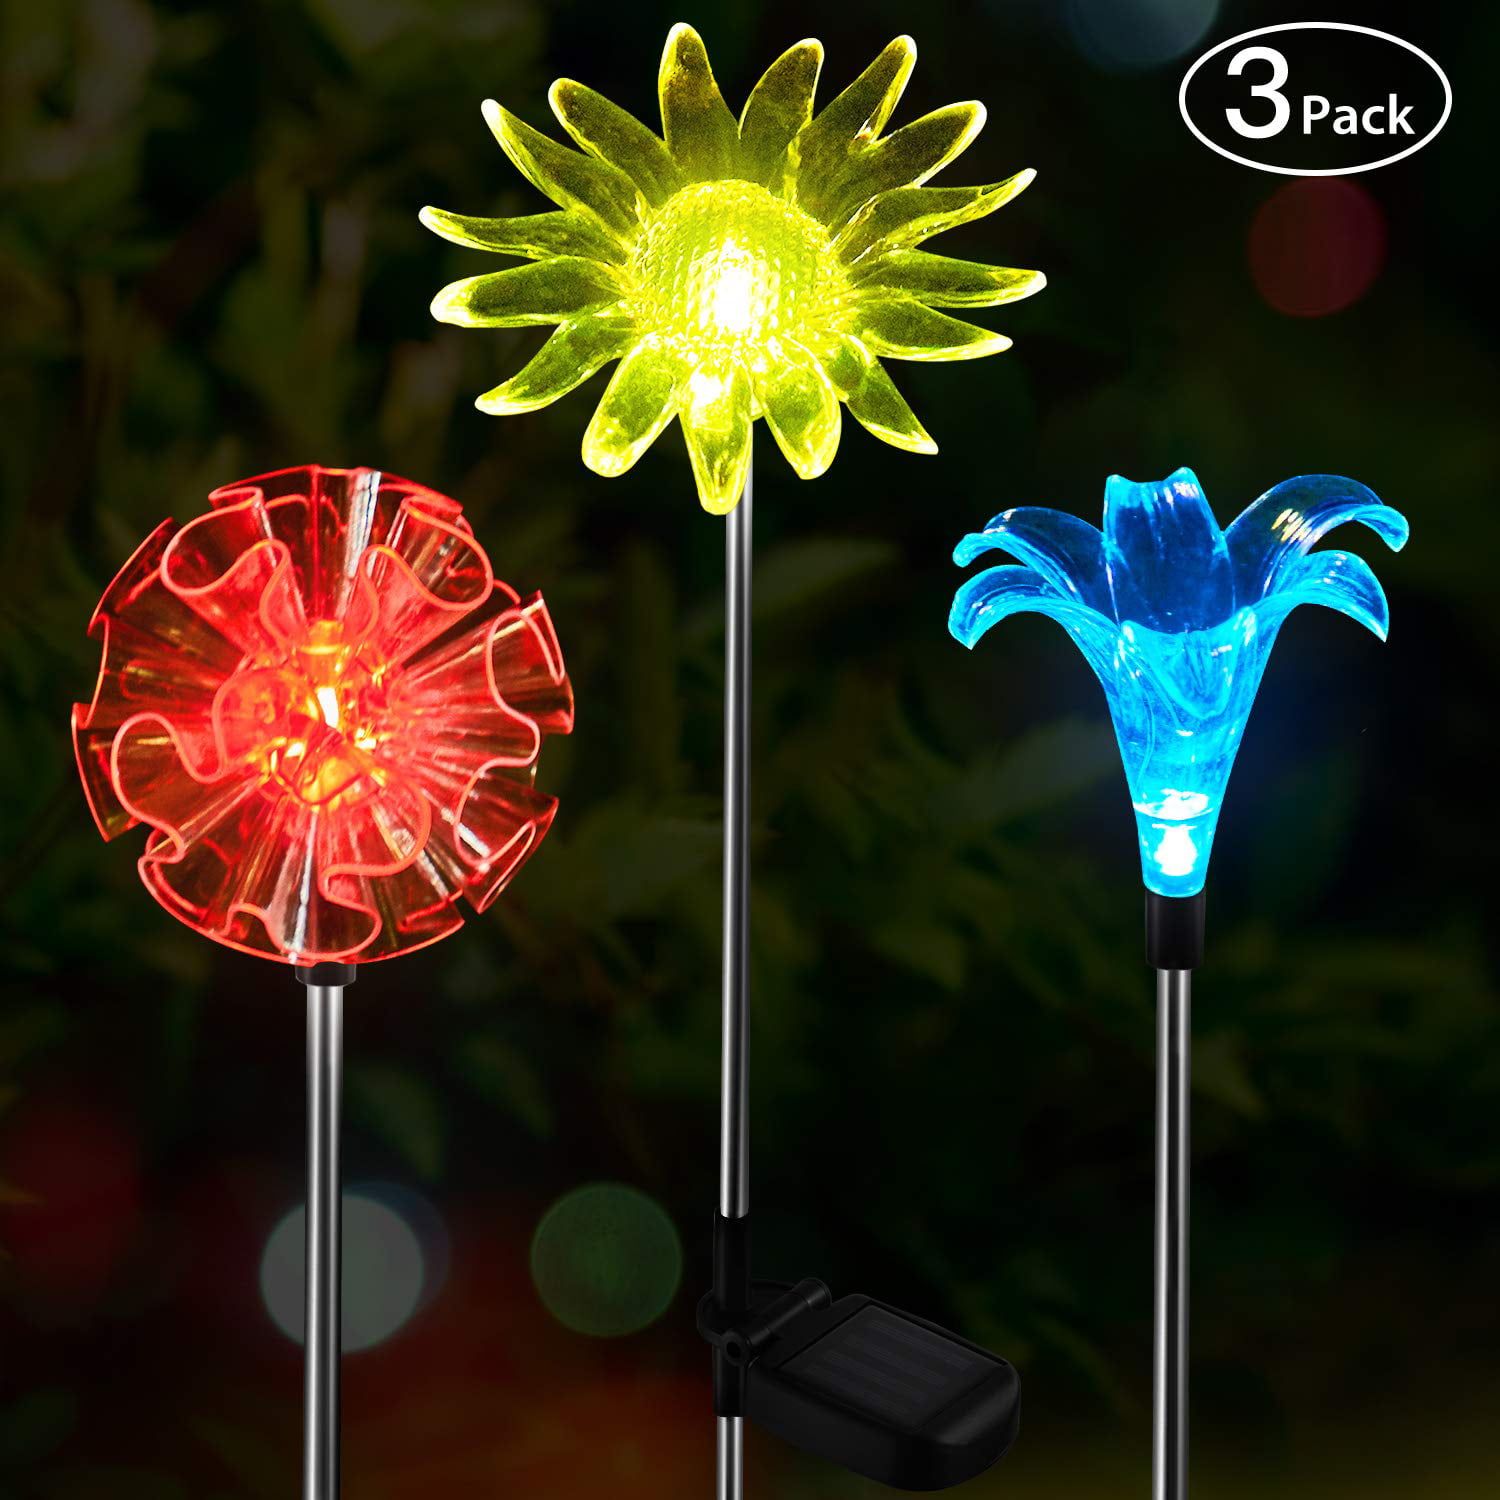 3PK Solar LED Garden Lights Post Patio Path Outdoor Lighting Colour Changing 